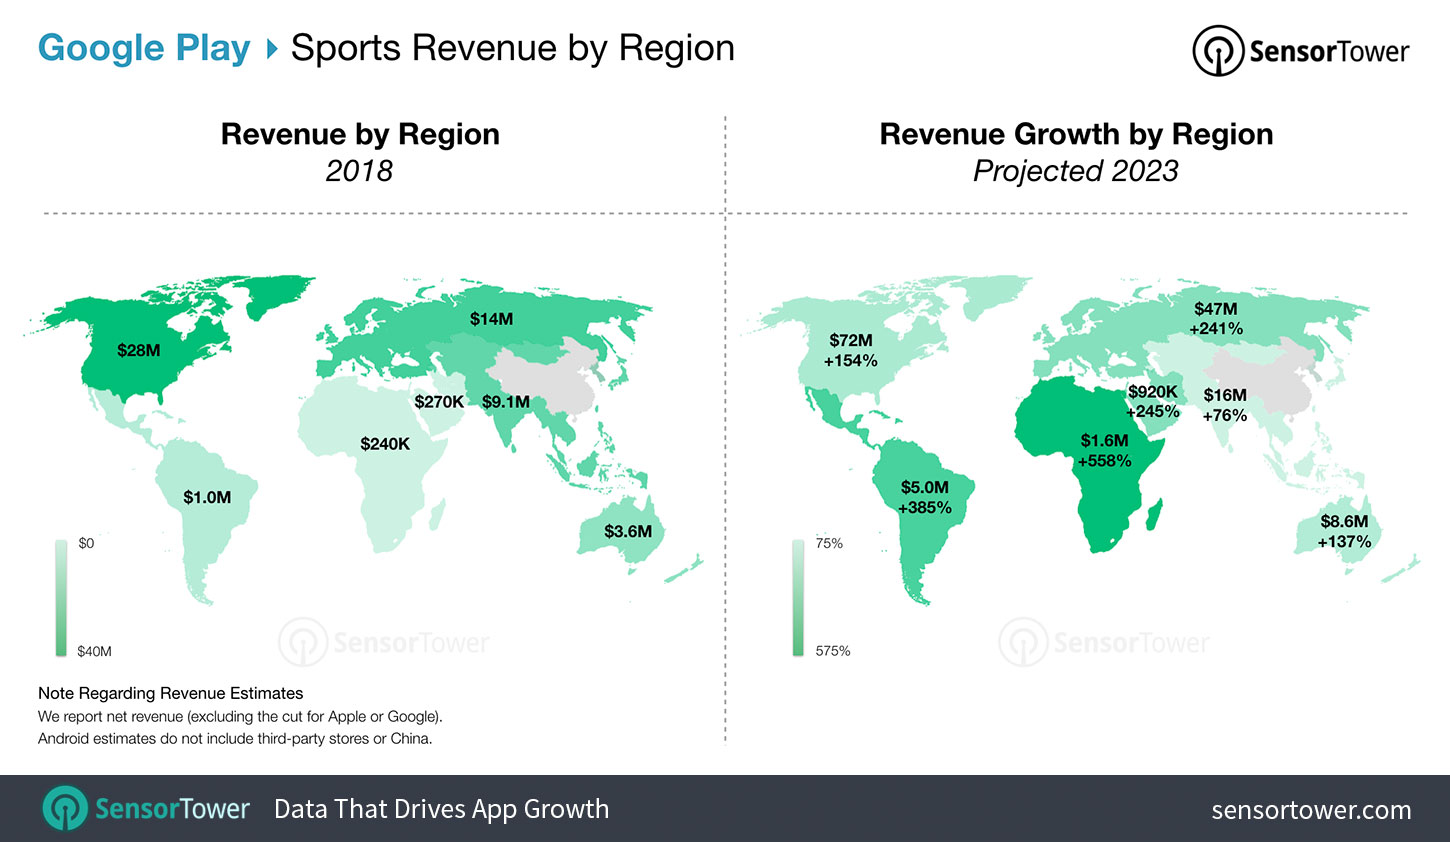 Worldwide Sports Apps Revenue Growth Forecast Chart for the Google Play Store